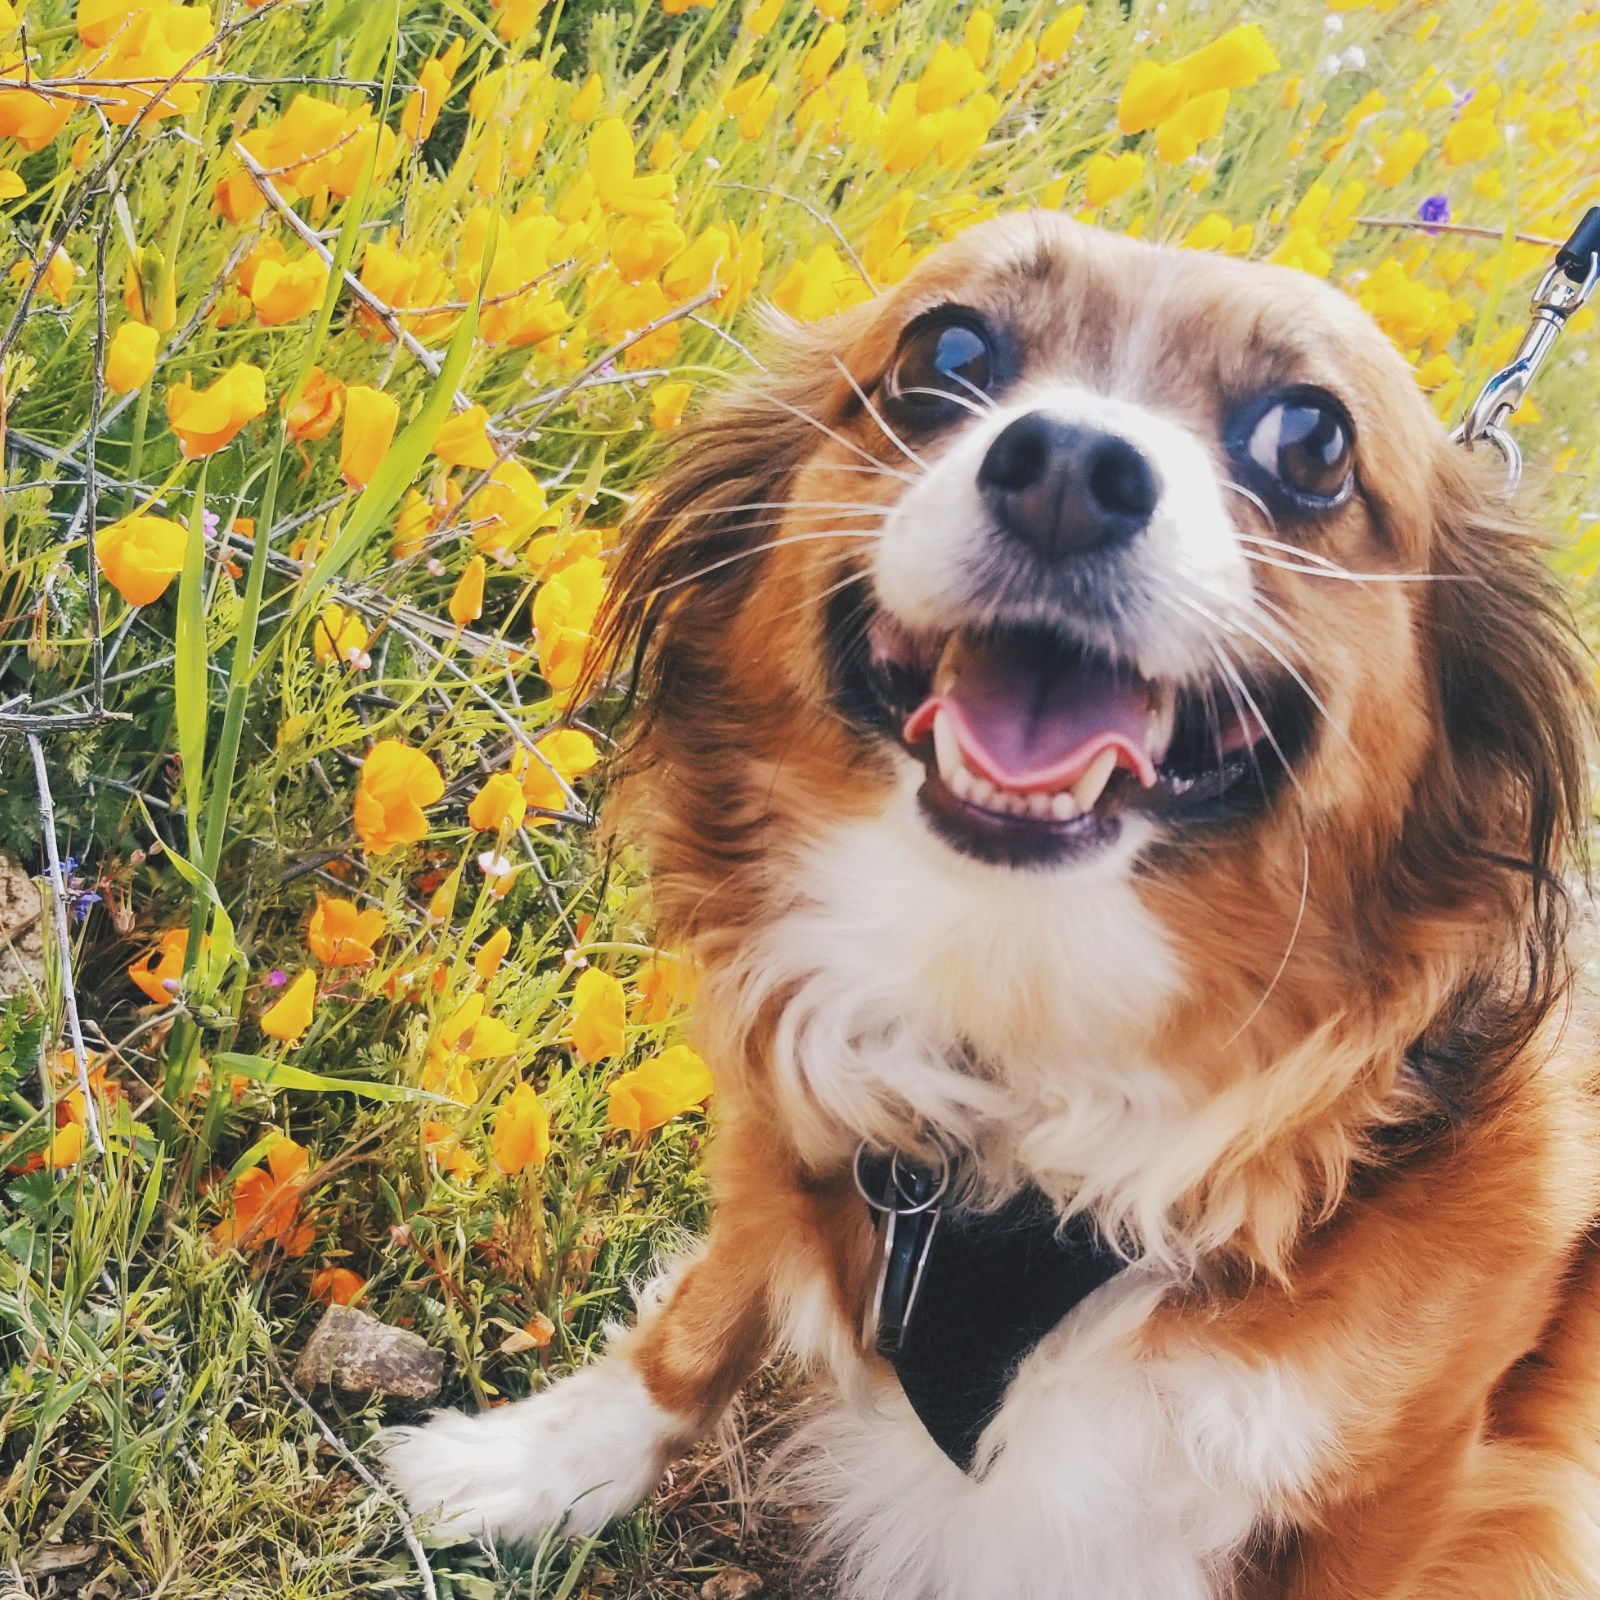 A dog happy, sitting in a field of poppies